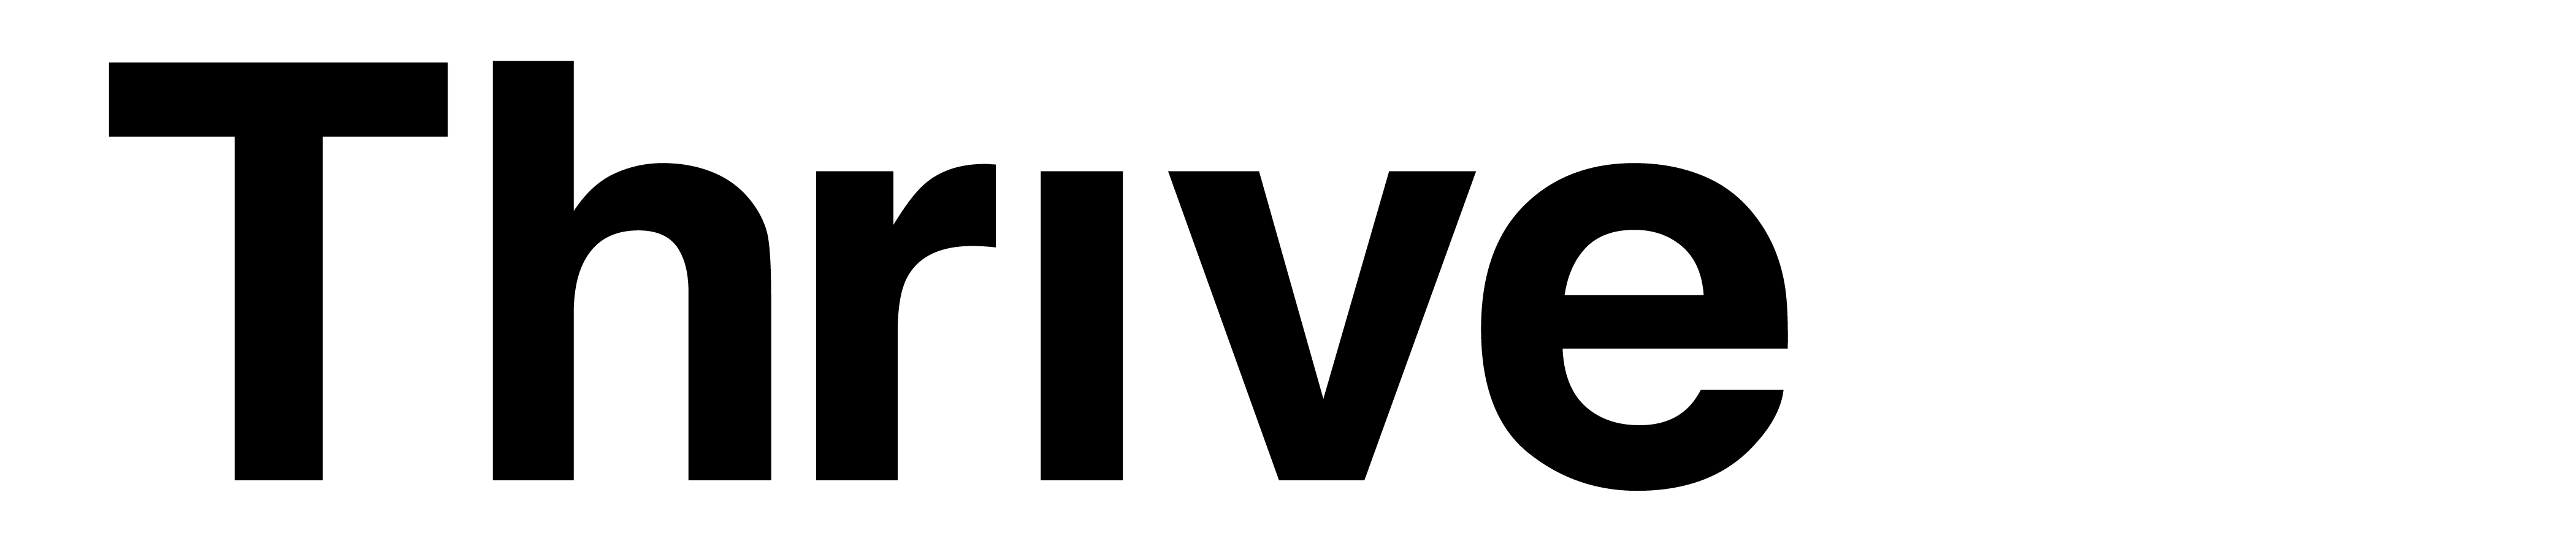 Thrive-Logo-Black-wWhite-Accent.png